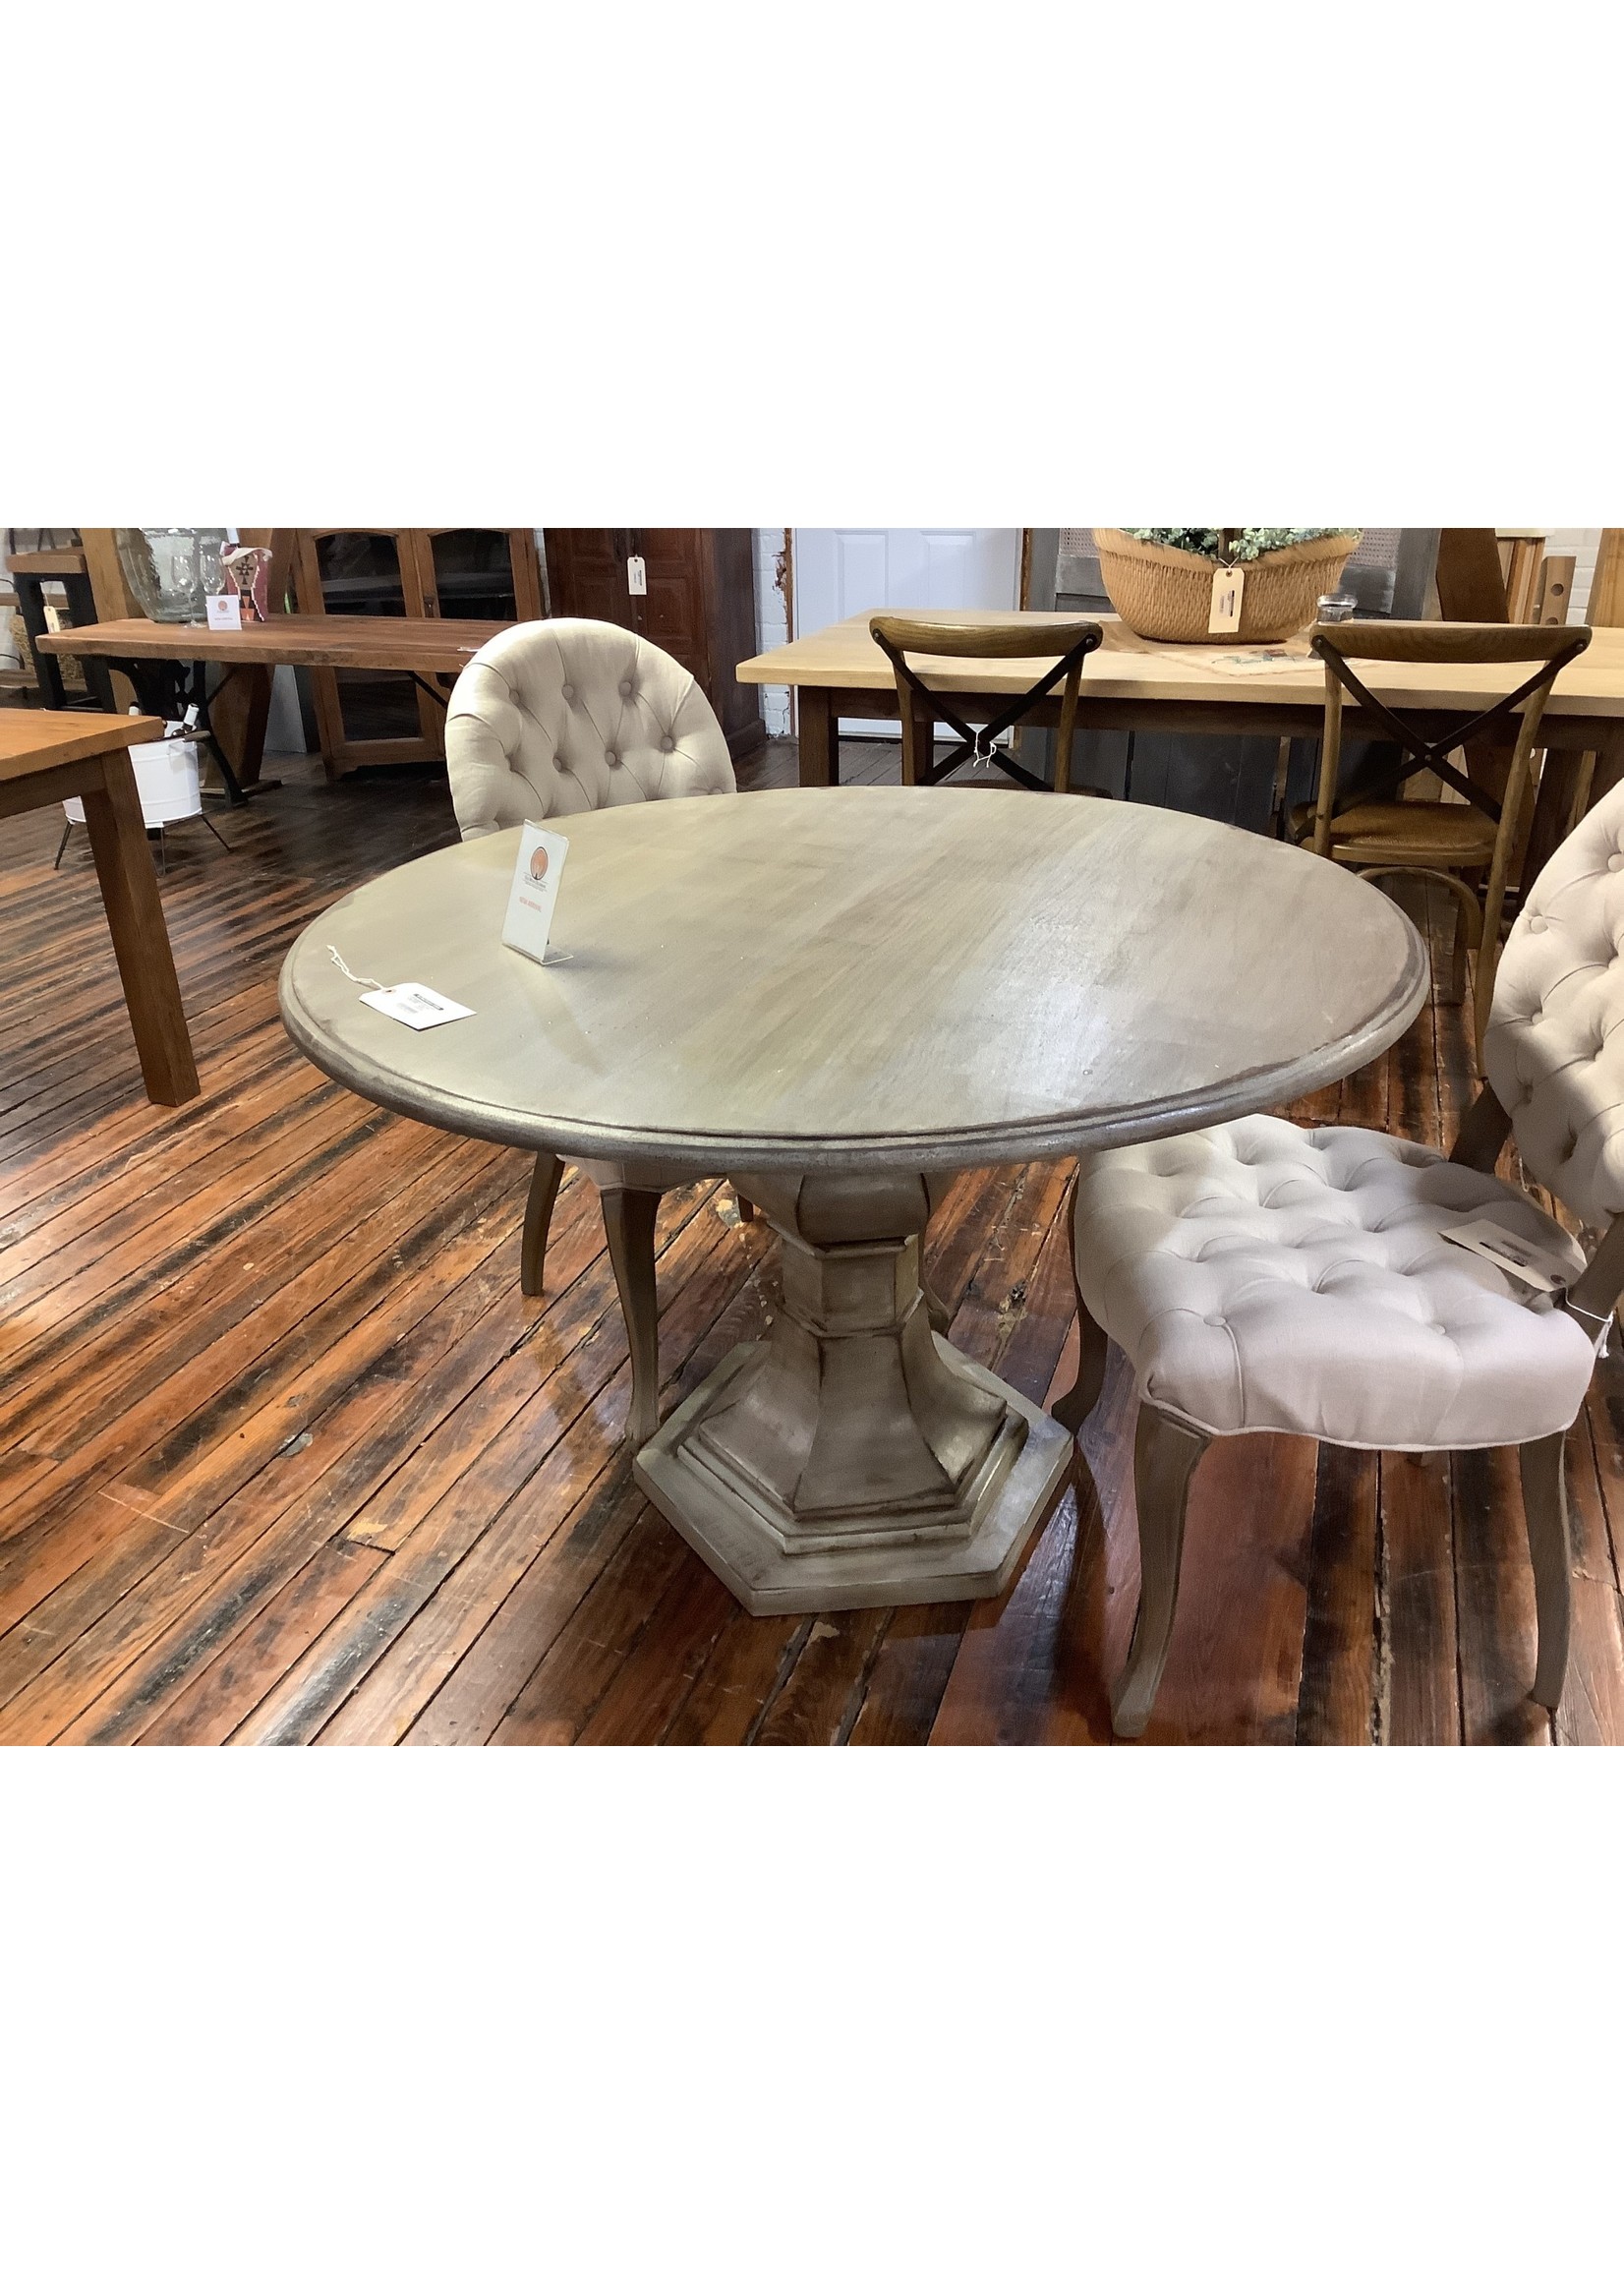 Aged Tan Round Dining Table Pedestal 48"x48"x30"